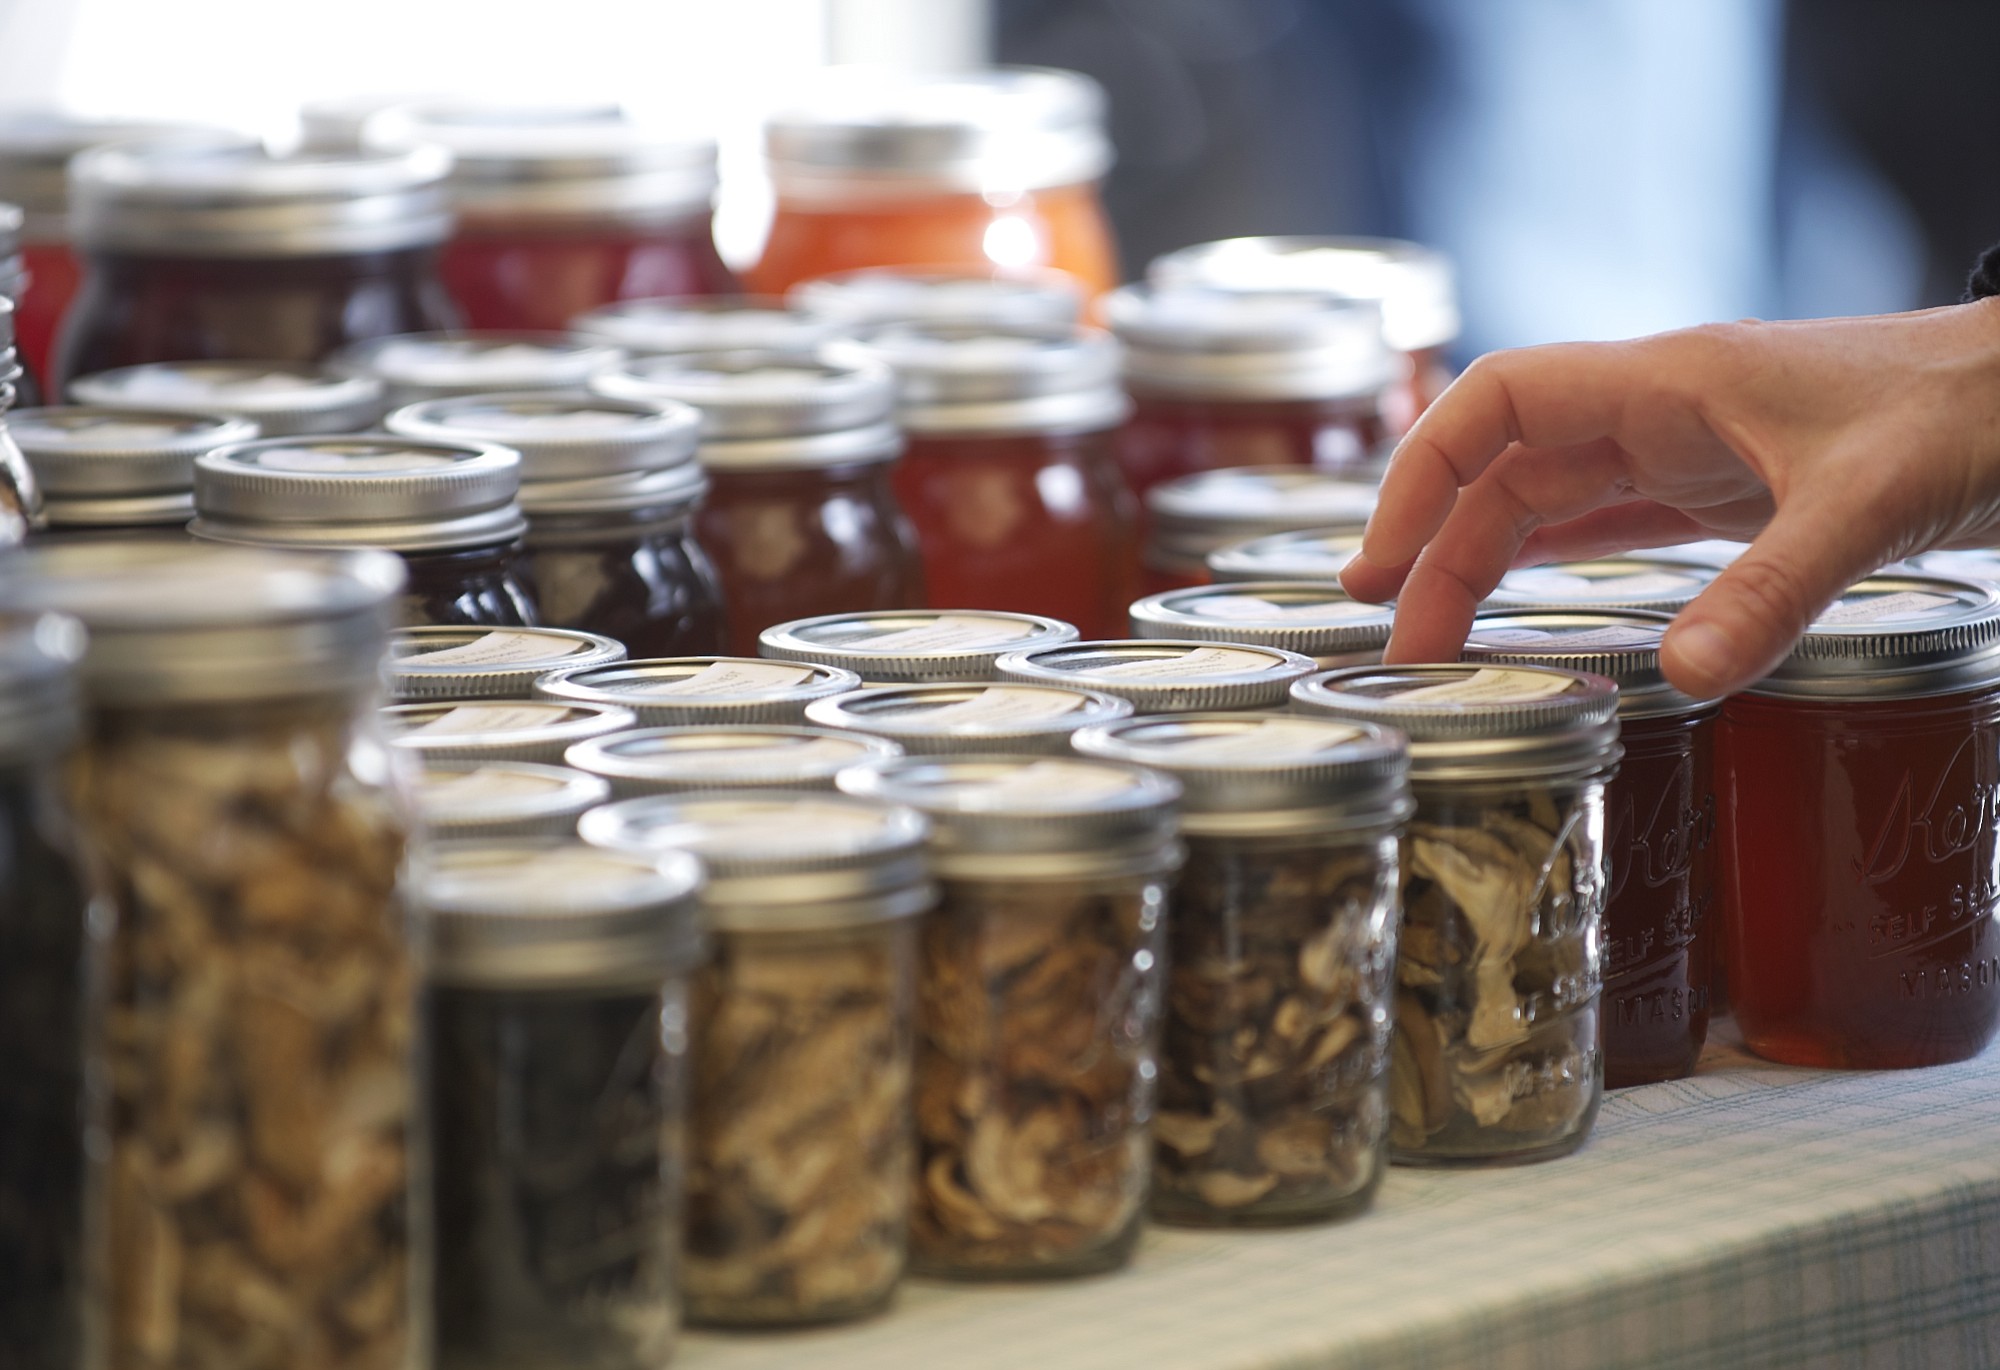 Columbian files
Jars of mushrooms and other prepared products are becoming more popular at farmers markets, said Jordan Boldt, executive director of the Vancouver Farmers Market.